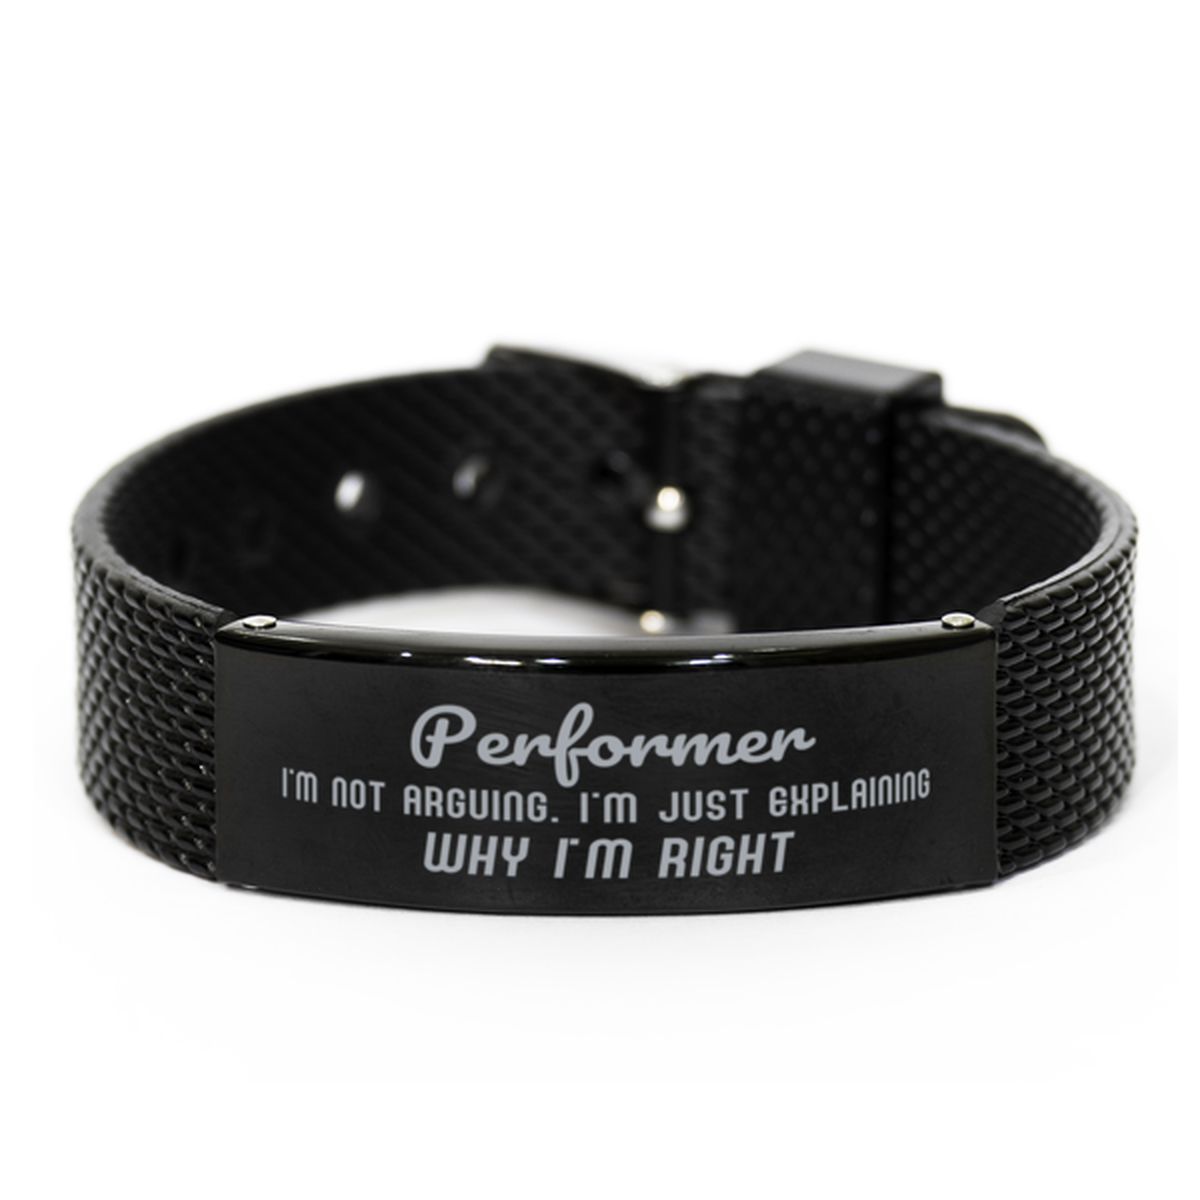 Performer I'm not Arguing. I'm Just Explaining Why I'm RIGHT Black Shark Mesh Bracelet, Funny Saying Quote Performer Gifts For Performer Graduation Birthday Christmas Gifts for Men Women Coworker